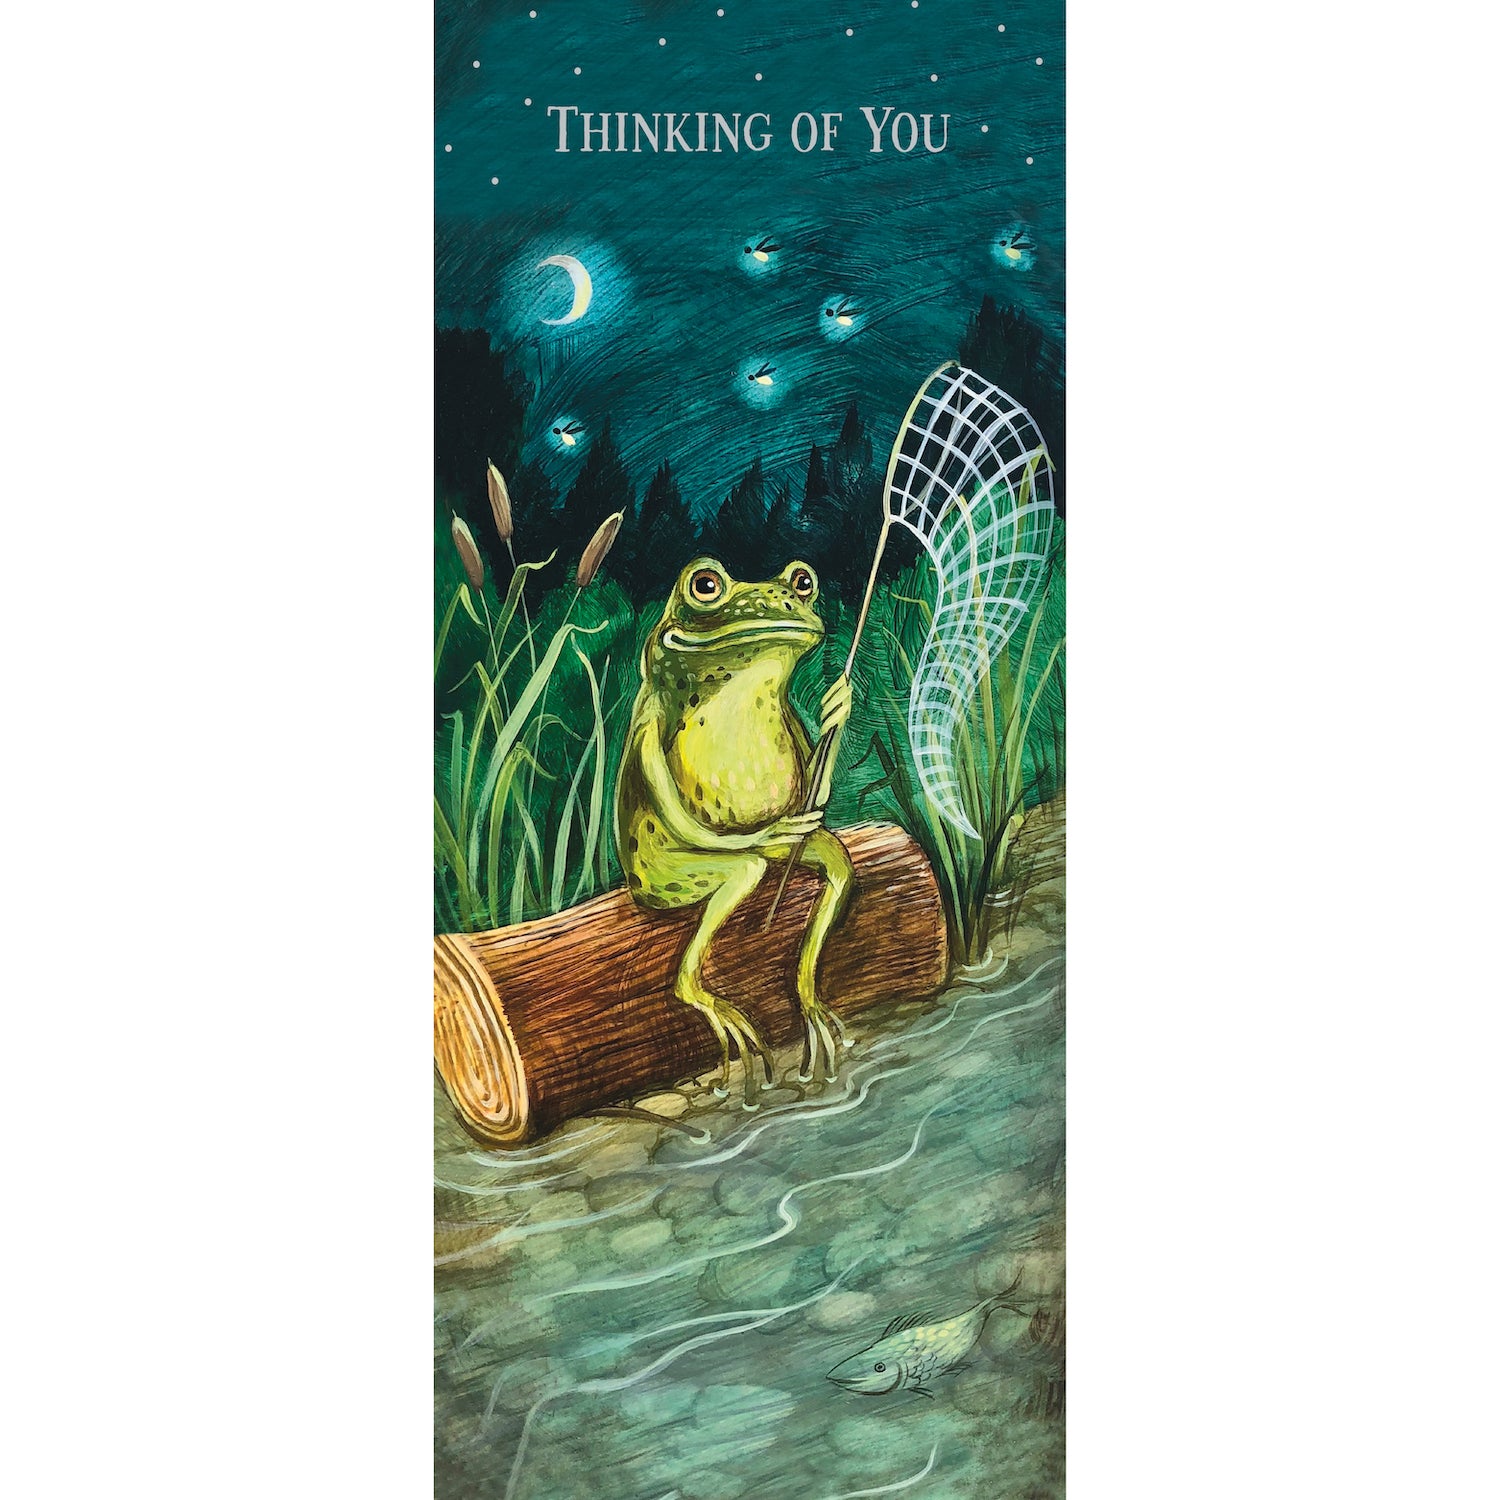 A Thinking of You Frog Card from Hester &amp; Cook sitting on a log with a silver foil fishing net.